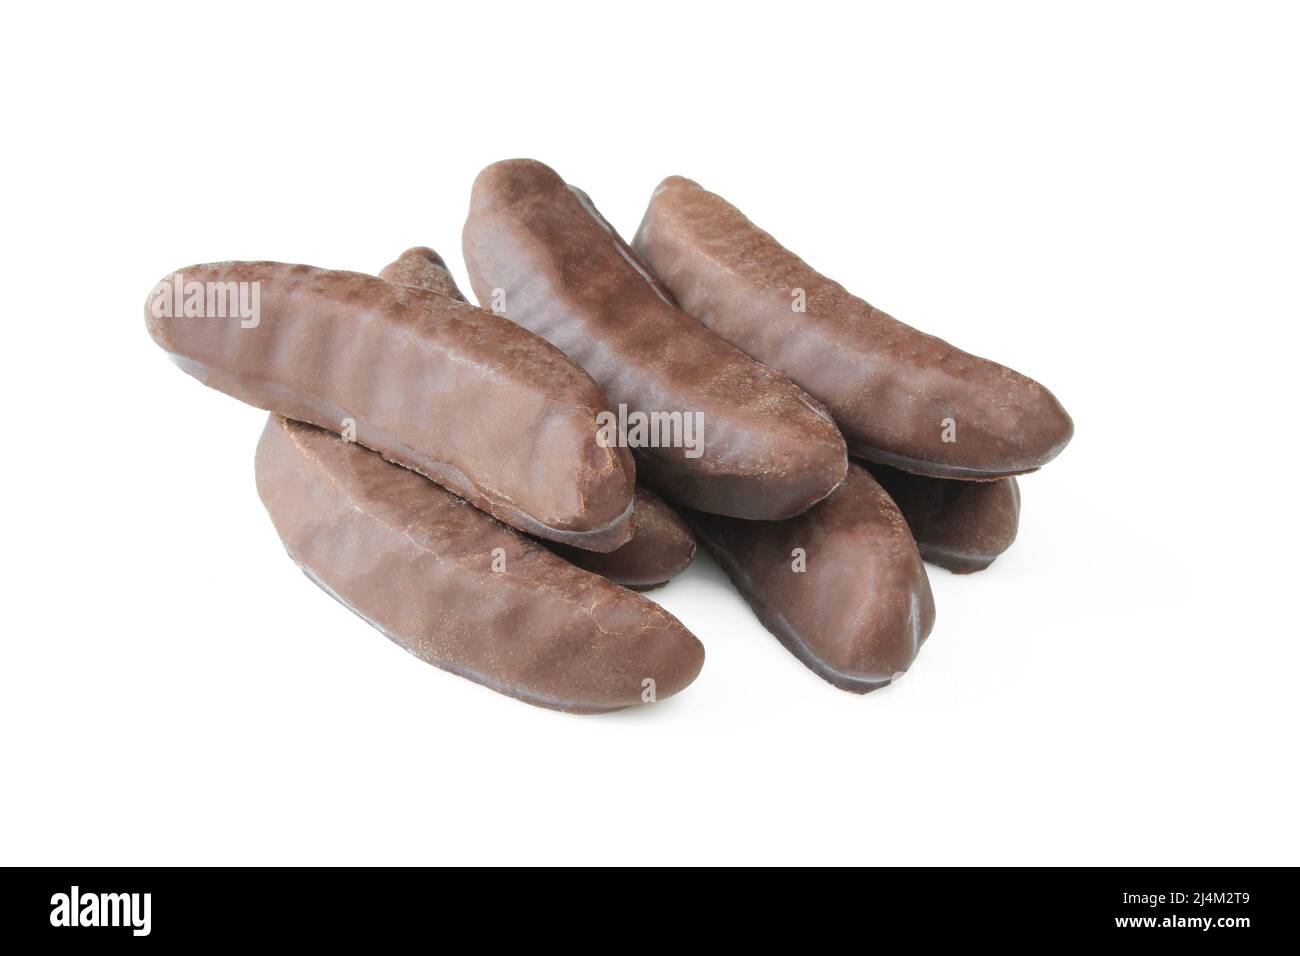 Pile of foamy chocolate coated banana flavor snack isolated on white background Stock Photo